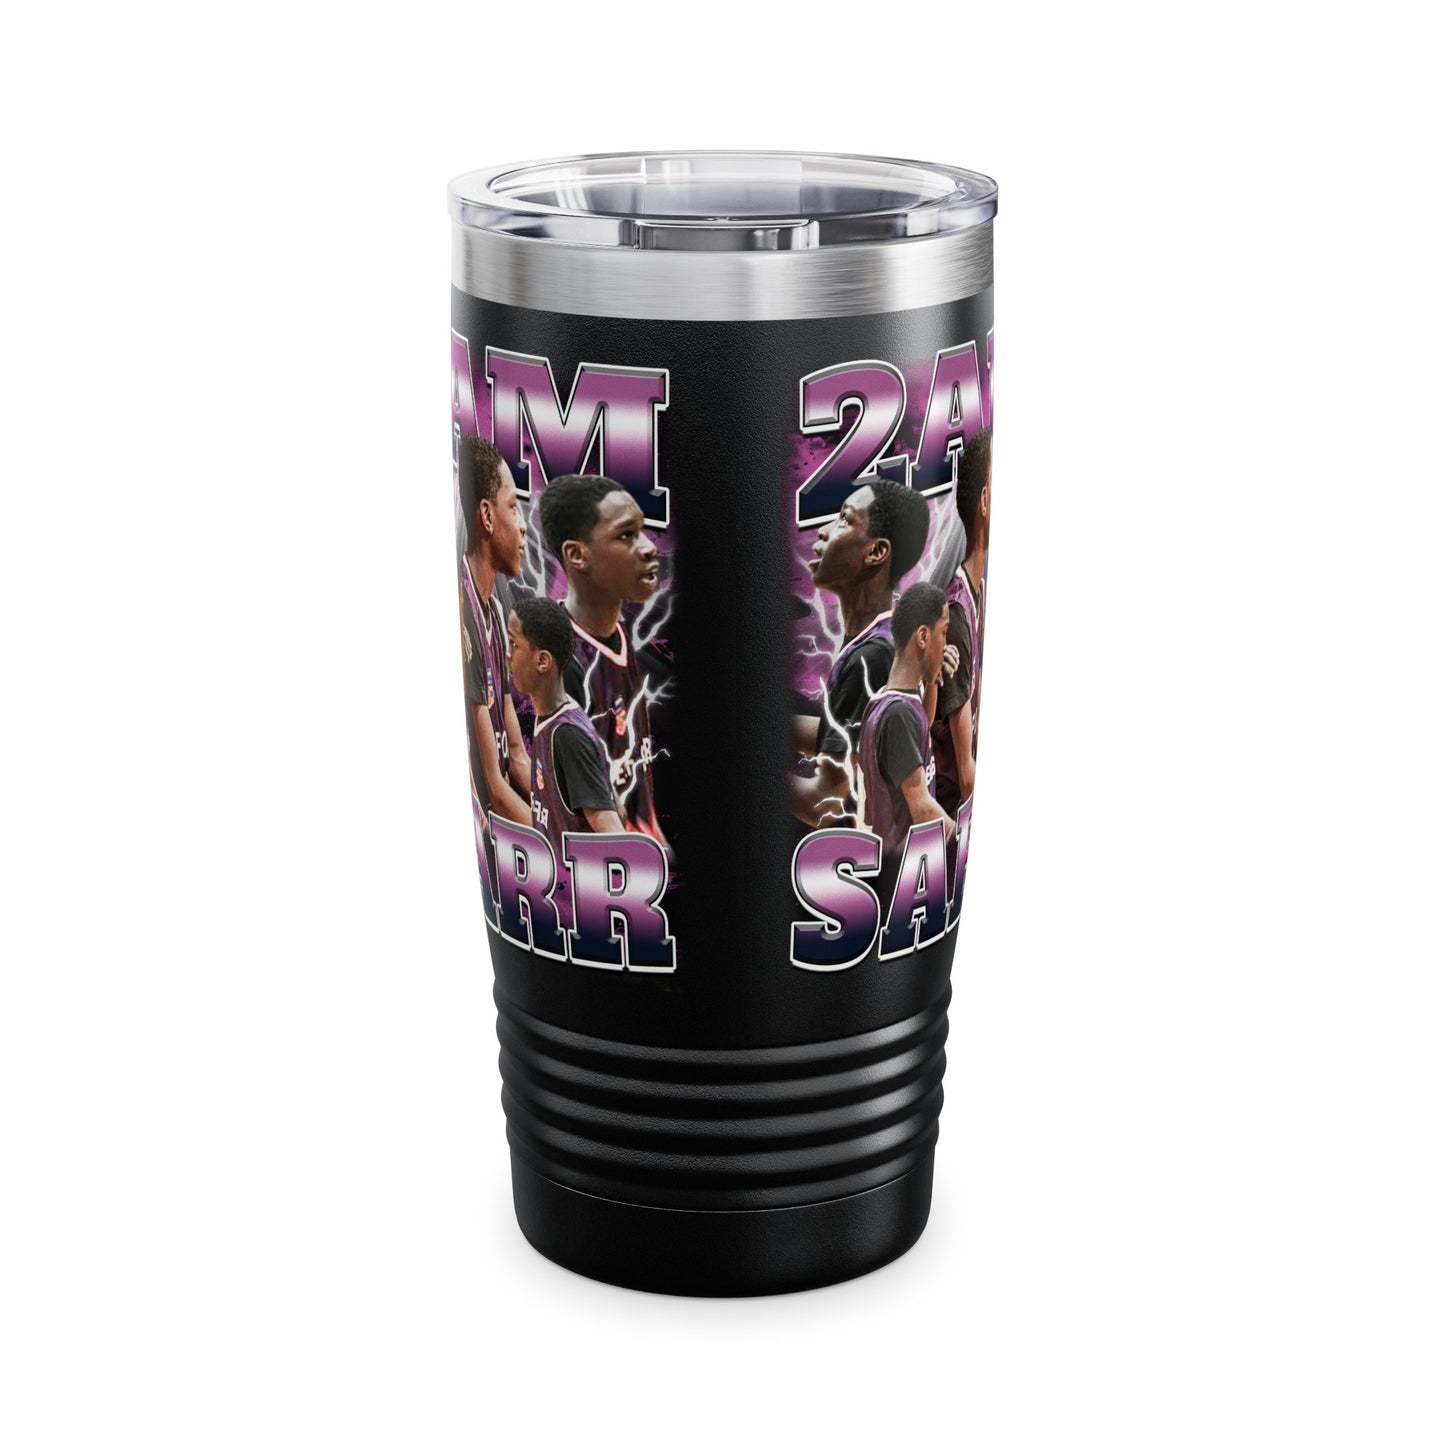 2am Sarr Stainless Steal Tumbler